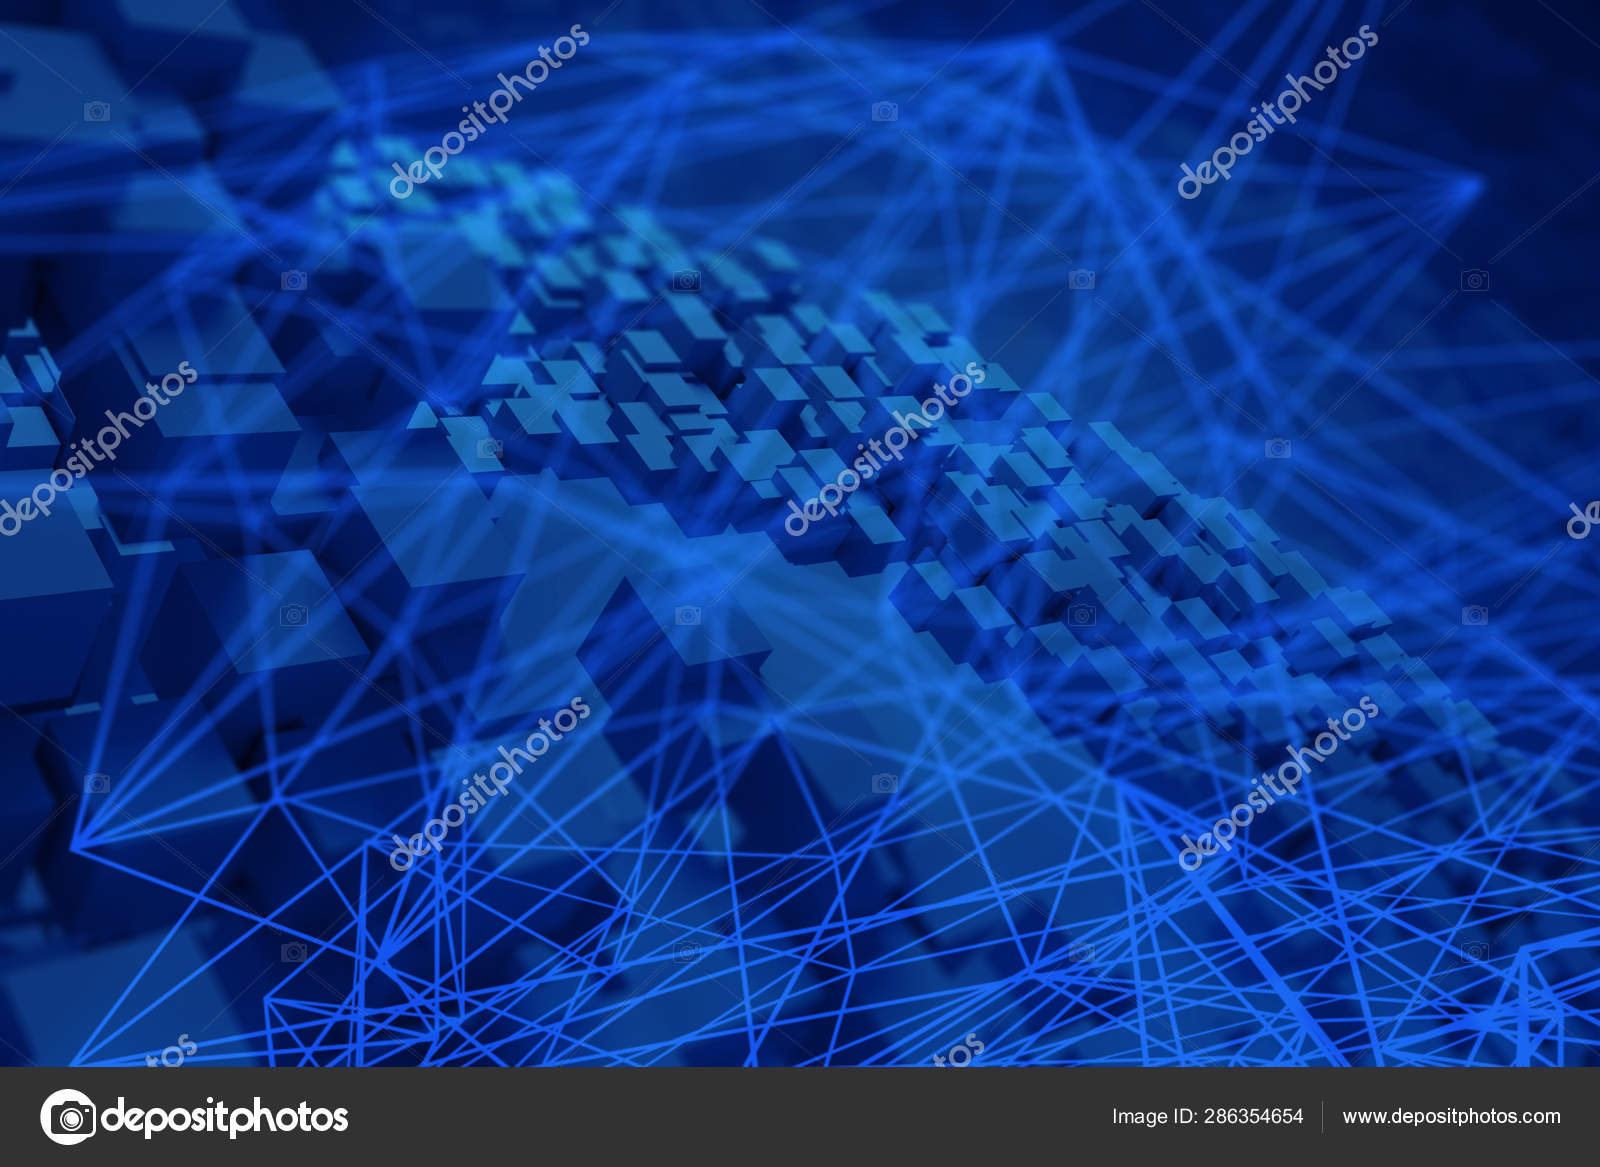 Many Cube Digital Abstract Glow Line Illustration Network Concept Stock Photo C Issaro Now2